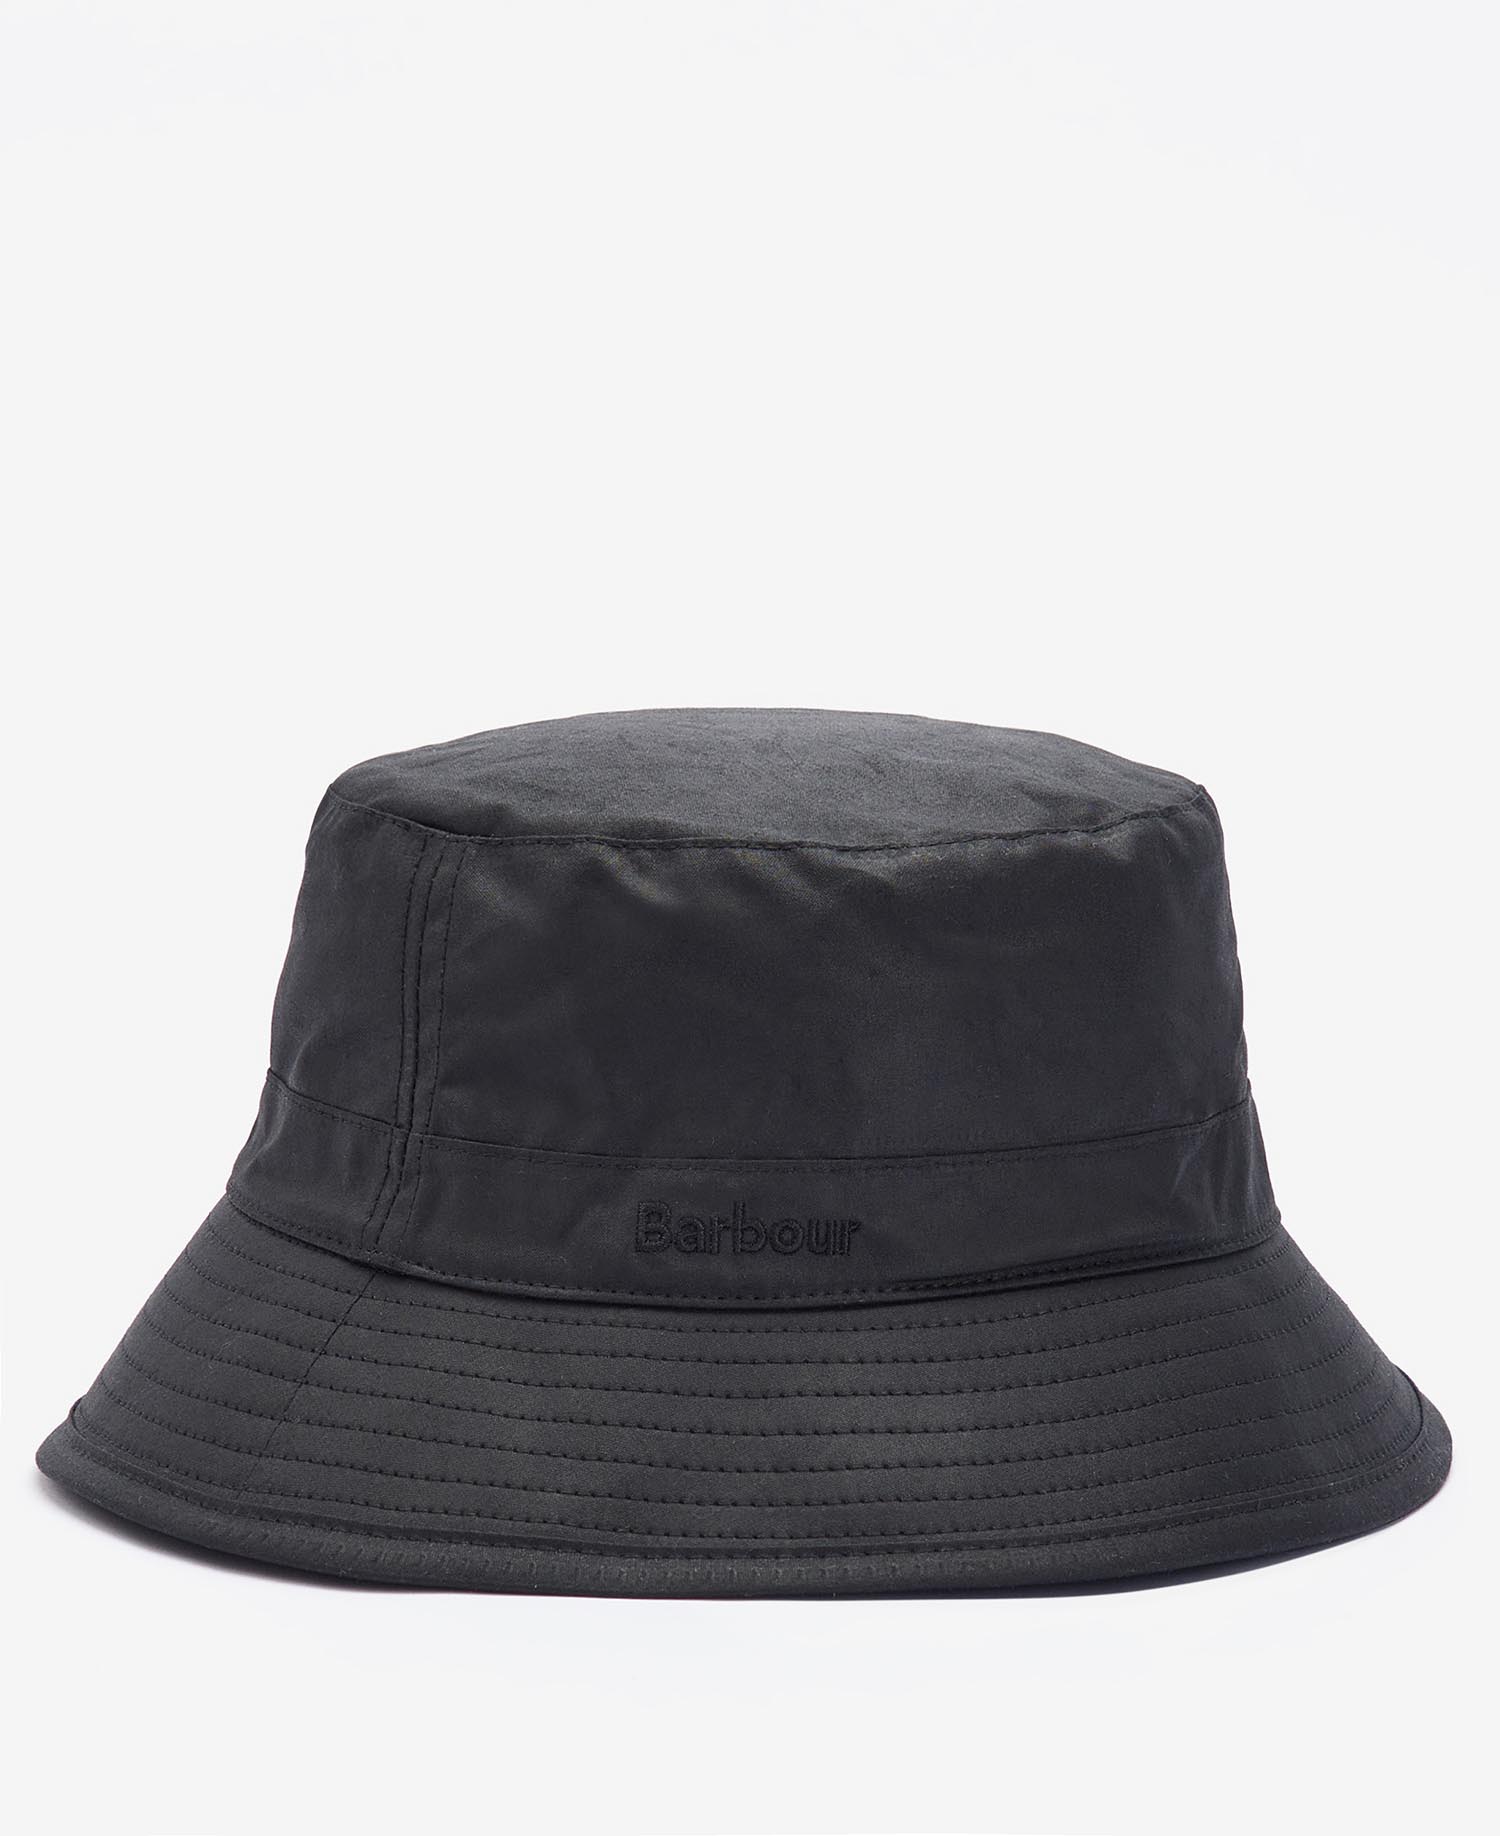 Barbour Wax Sports Hat in Black, Barbour